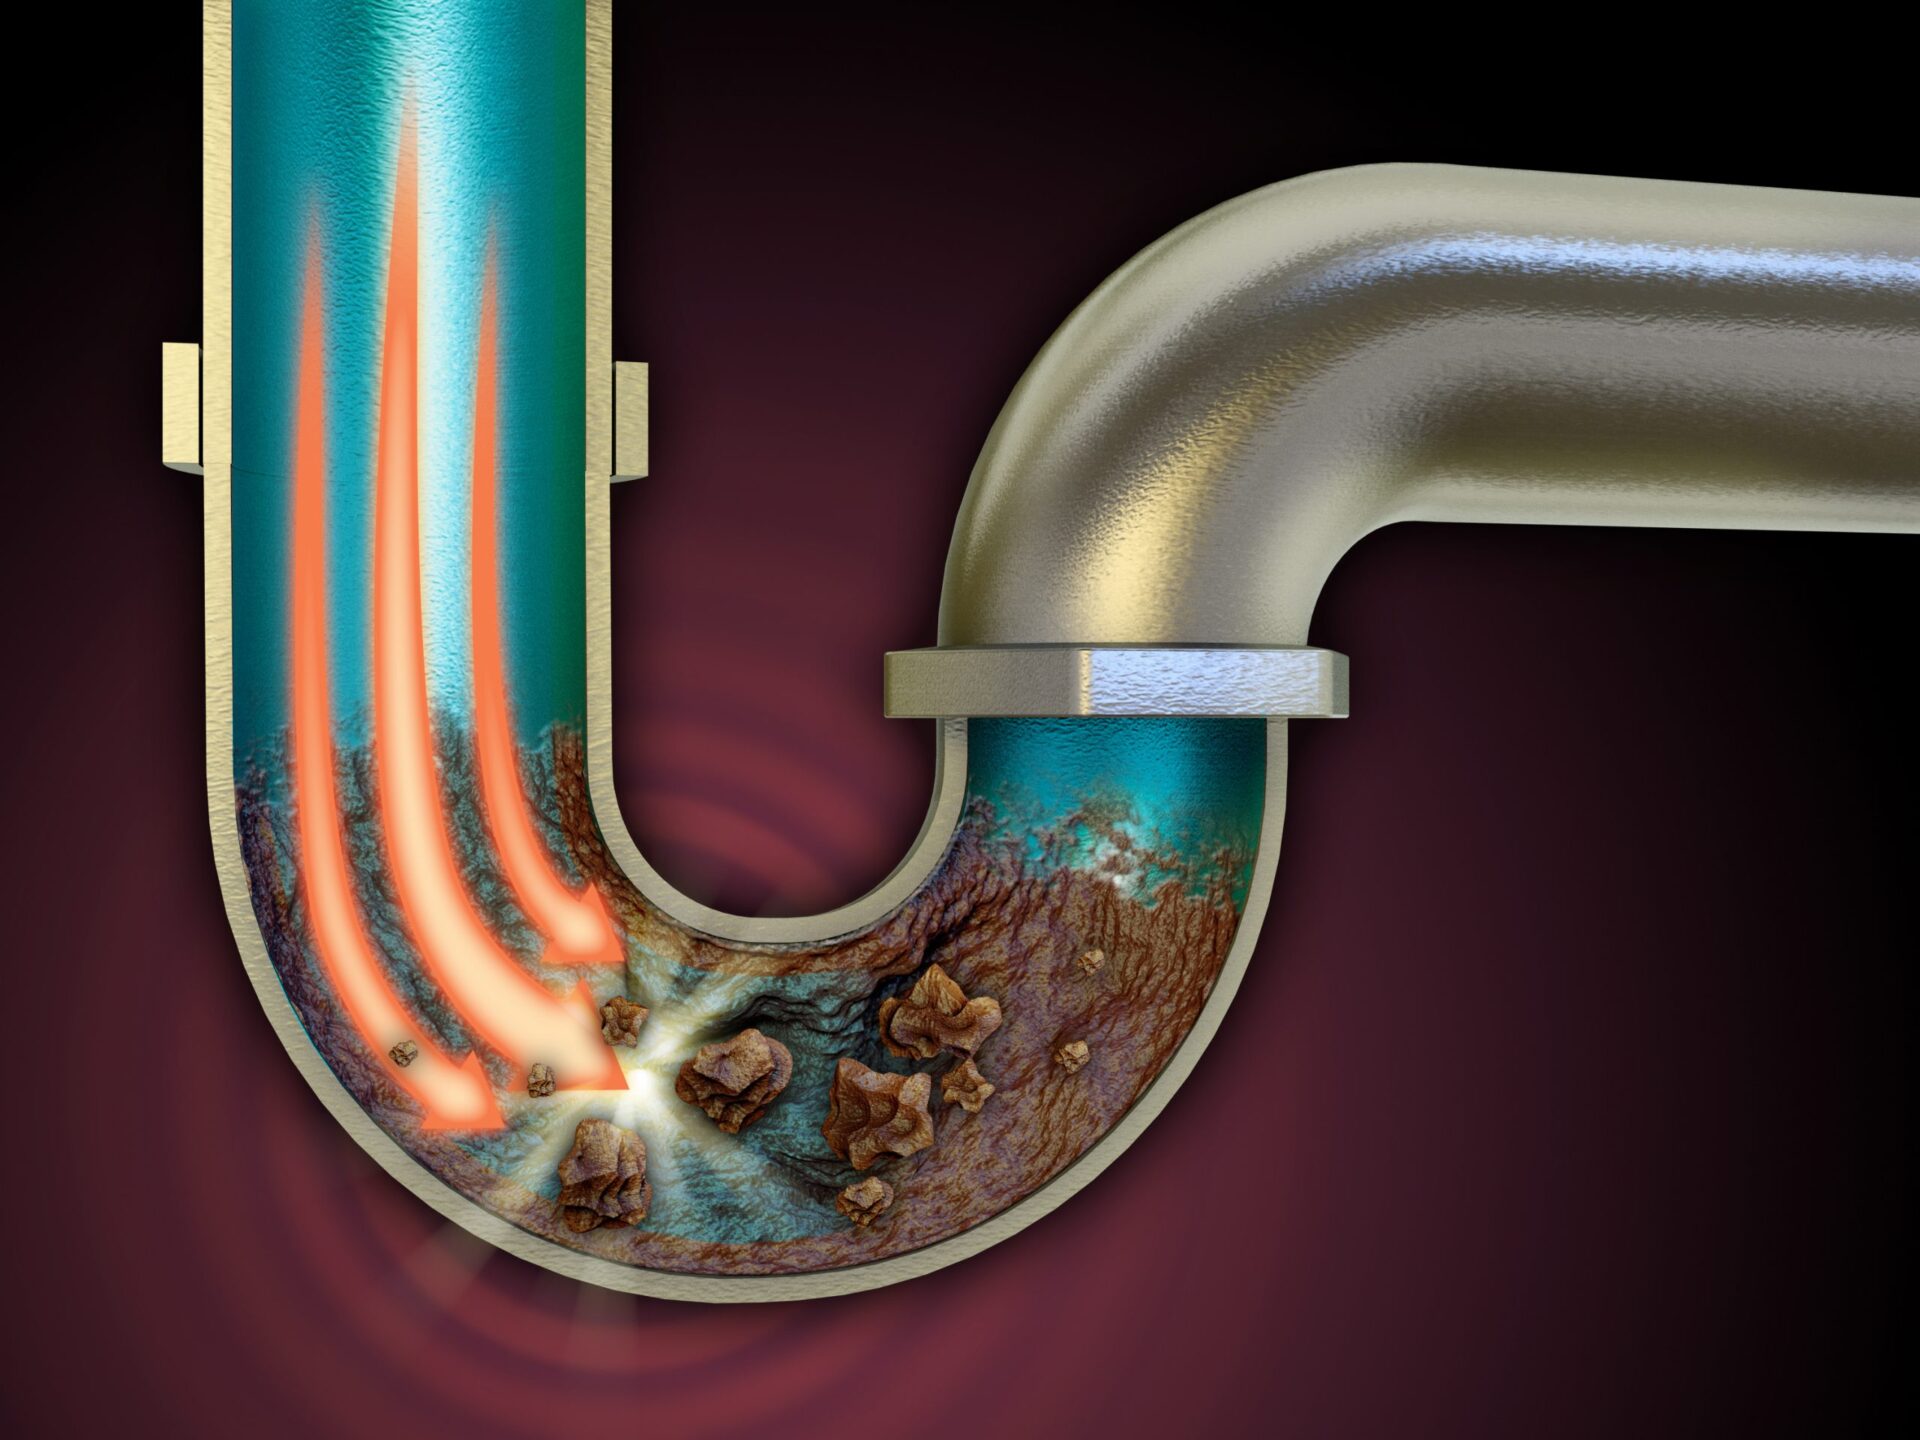 Digital illustration of drain cleaning service clearing out clogged pipes